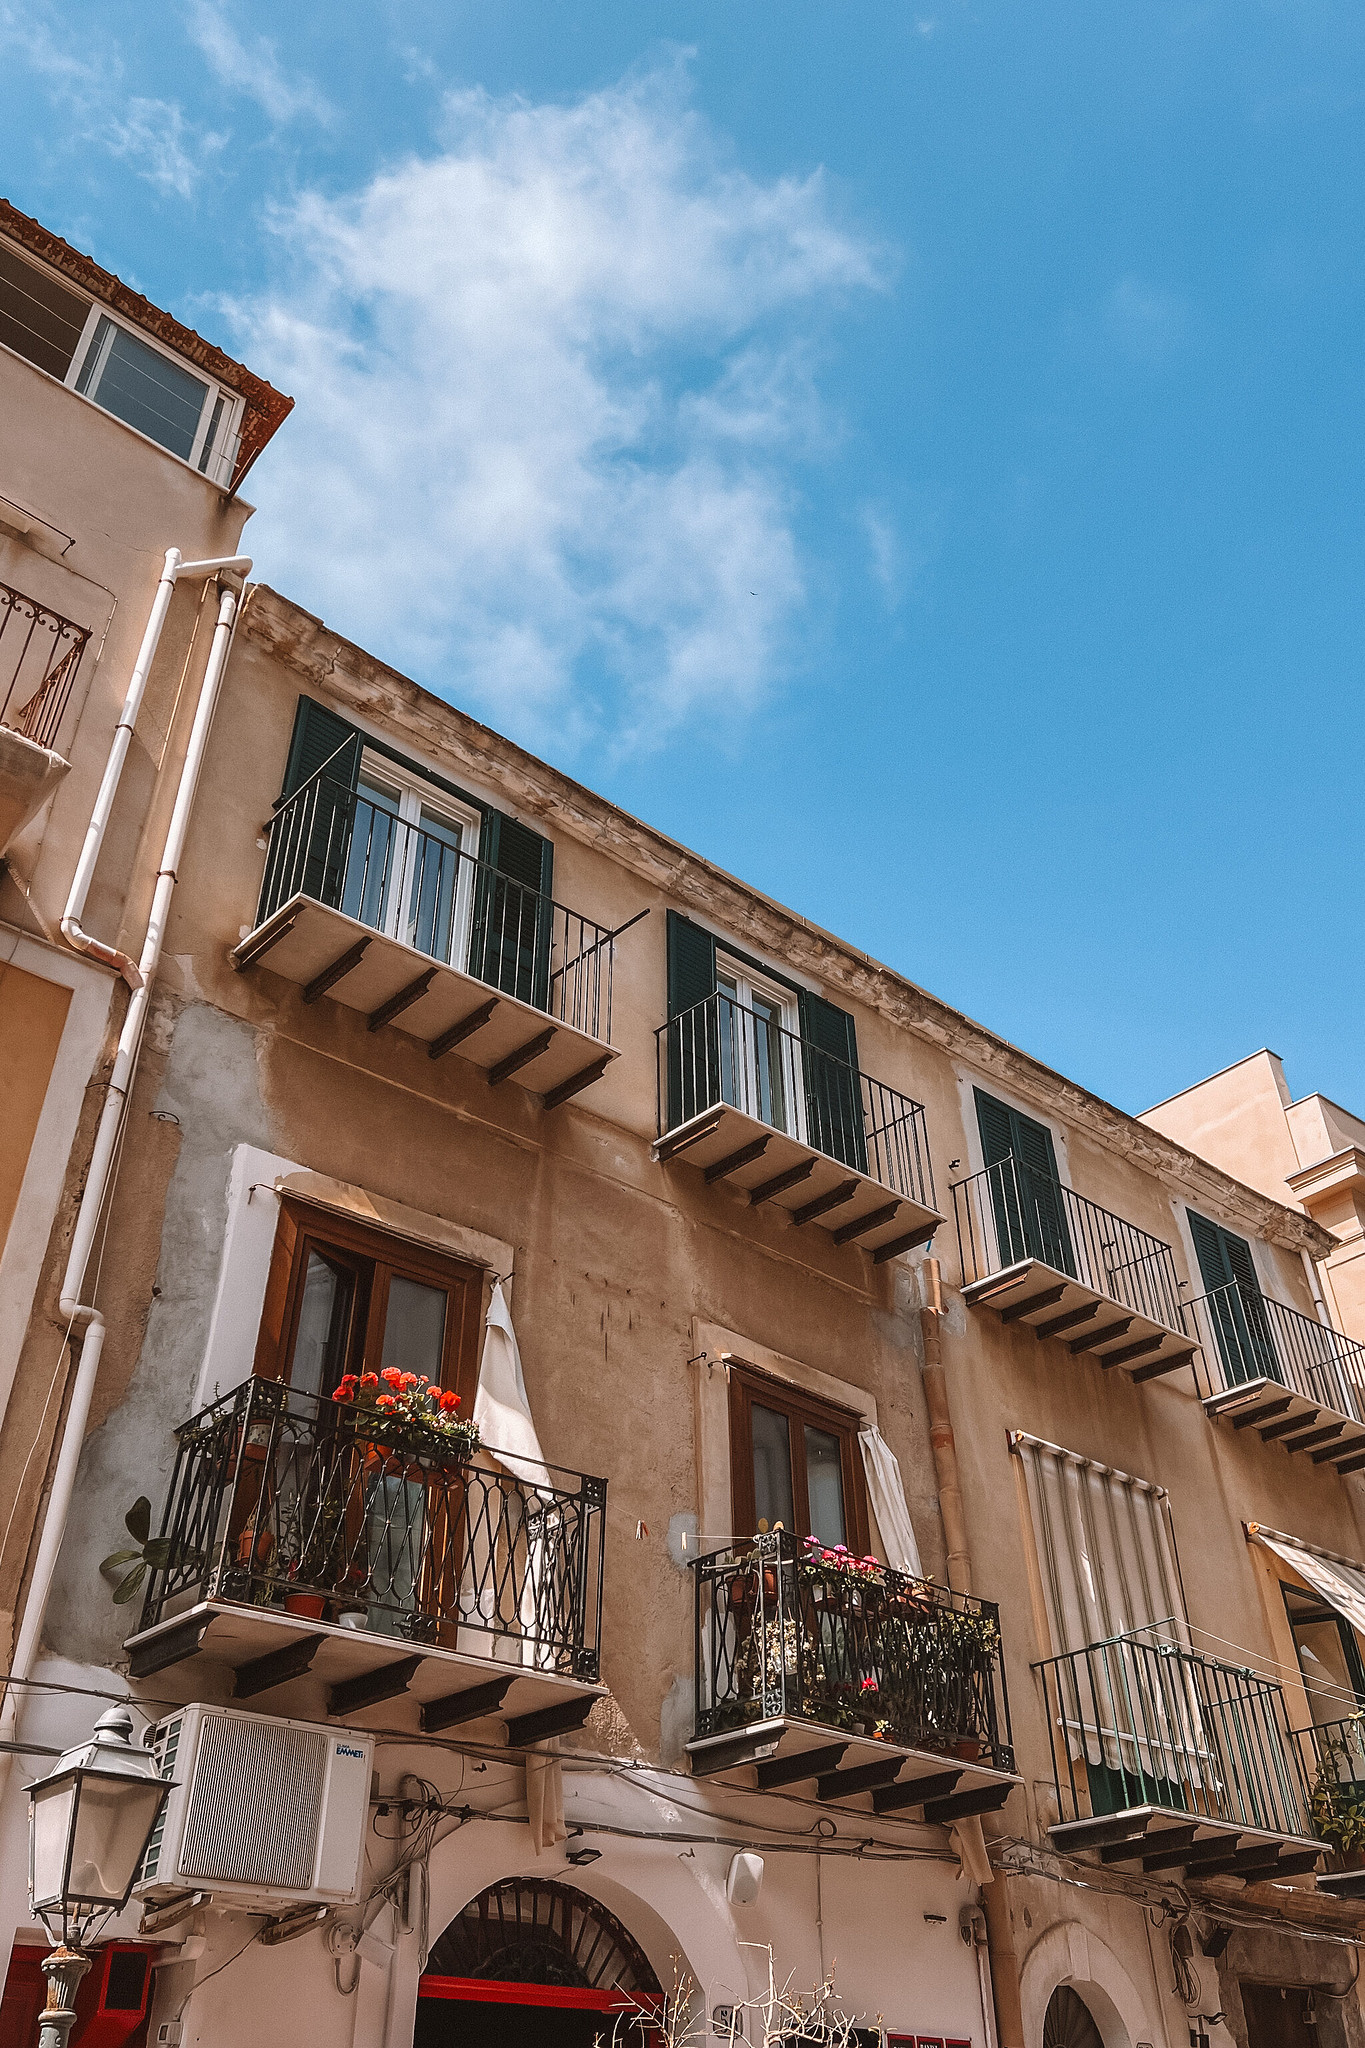 Explore the Picturesque Town of Cefalu | Cefalu Sicily Travel Guide | What to See, Do and Eat in Cefalu | Discover the Best Things to do in Cefalu, Sicily, Italy | Sicily Travel Tips | Visit Sicily